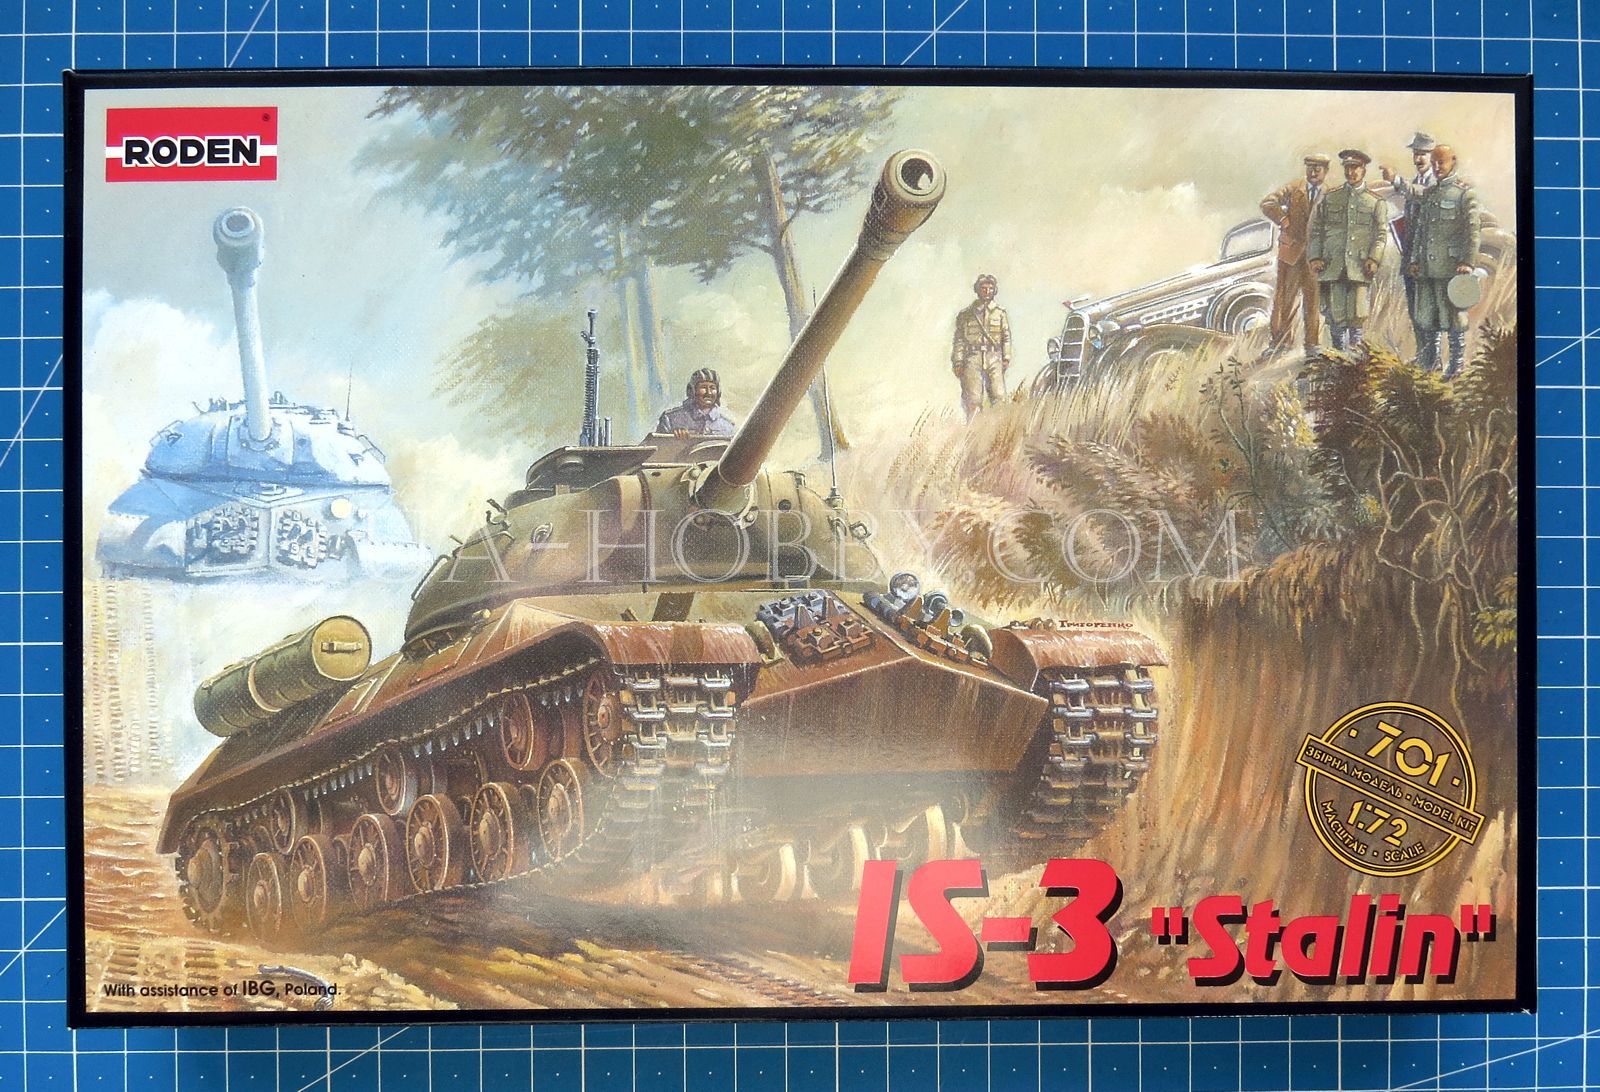 1/72 IS-3 "Stalin". Roden 701